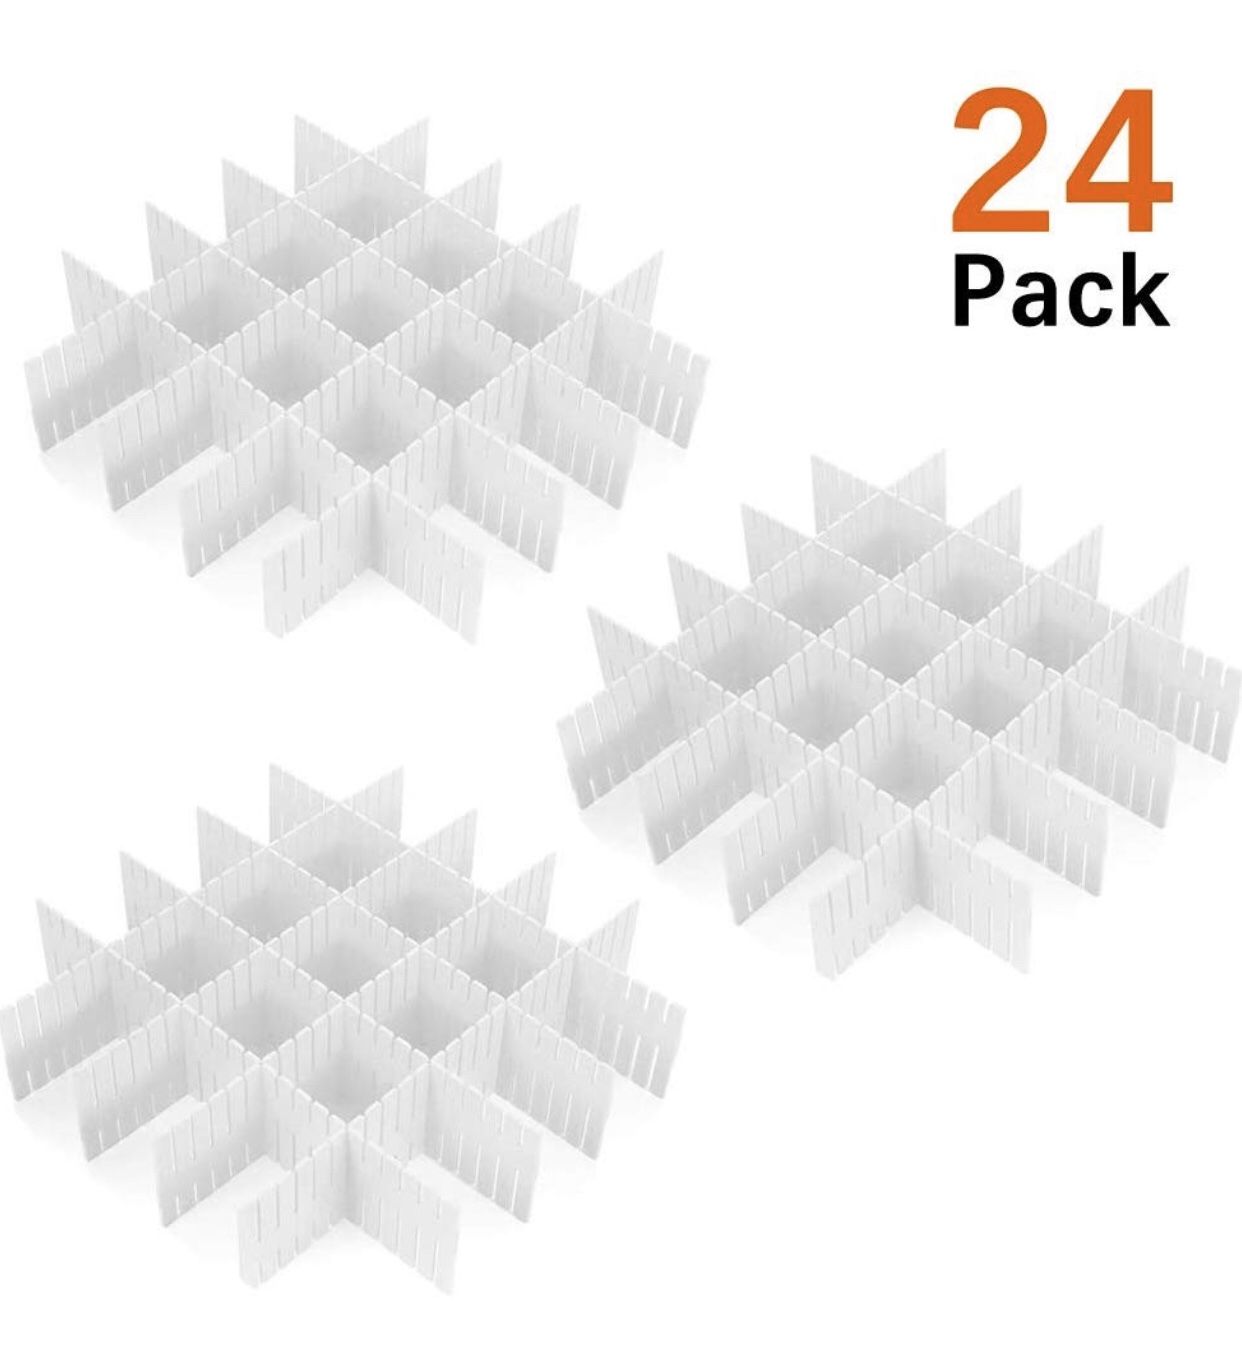 “24 Pcs Plastic DIY Grid Drawer Divider Household Necessities Storage Thickening Housing Spacer Sub-Grid Finishing Shelves for Home Tidy Closet Statio